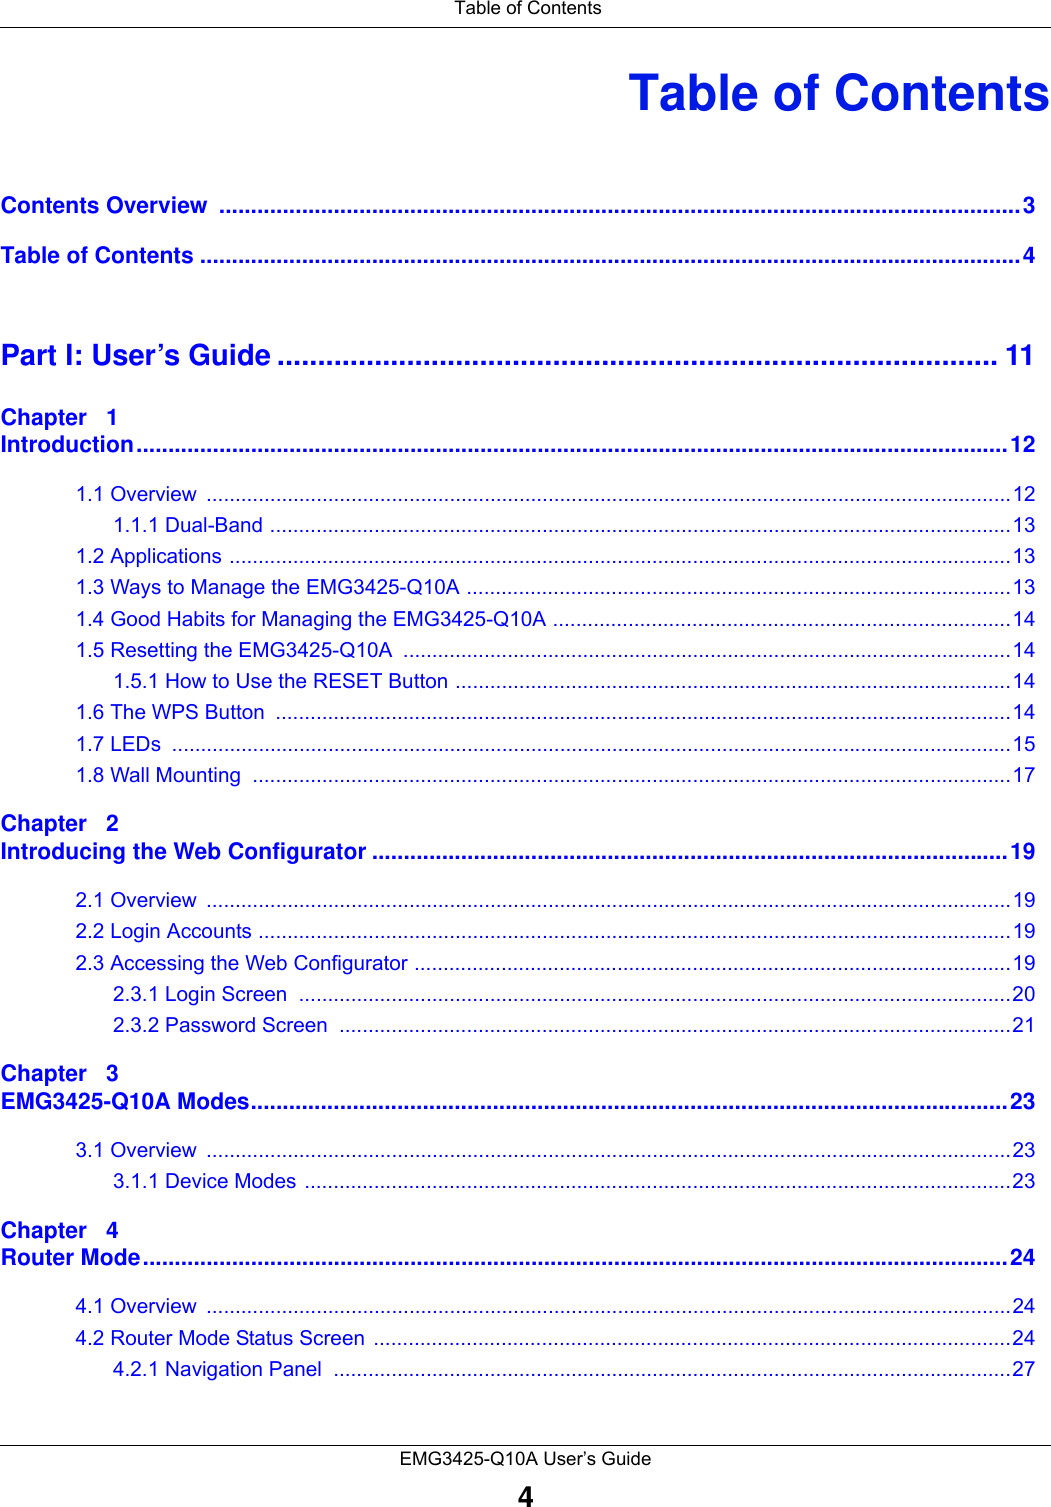 Table of ContentsEMG3425-Q10A User’s Guide4Table of ContentsContents Overview  ..............................................................................................................................3Table of Contents .................................................................................................................................4Part I: User’s Guide ......................................................................................... 11Chapter   1Introduction.........................................................................................................................................121.1 Overview  ...........................................................................................................................................121.1.1 Dual-Band ................................................................................................................................131.2 Applications .......................................................................................................................................131.3 Ways to Manage the EMG3425-Q10A ..............................................................................................131.4 Good Habits for Managing the EMG3425-Q10A ...............................................................................141.5 Resetting the EMG3425-Q10A .........................................................................................................141.5.1 How to Use the RESET Button ................................................................................................141.6 The WPS Button  ...............................................................................................................................141.7 LEDs  .................................................................................................................................................151.8 Wall Mounting  ...................................................................................................................................17Chapter   2Introducing the Web Configurator ....................................................................................................192.1 Overview  ...........................................................................................................................................192.2 Login Accounts ..................................................................................................................................192.3 Accessing the Web Configurator .......................................................................................................192.3.1 Login Screen  ...........................................................................................................................202.3.2 Password Screen  ....................................................................................................................21Chapter   3EMG3425-Q10A Modes.......................................................................................................................233.1 Overview  ...........................................................................................................................................233.1.1 Device Modes ..........................................................................................................................23Chapter   4Router Mode........................................................................................................................................244.1 Overview  ...........................................................................................................................................244.2 Router Mode Status Screen  ..............................................................................................................244.2.1 Navigation Panel  .....................................................................................................................27